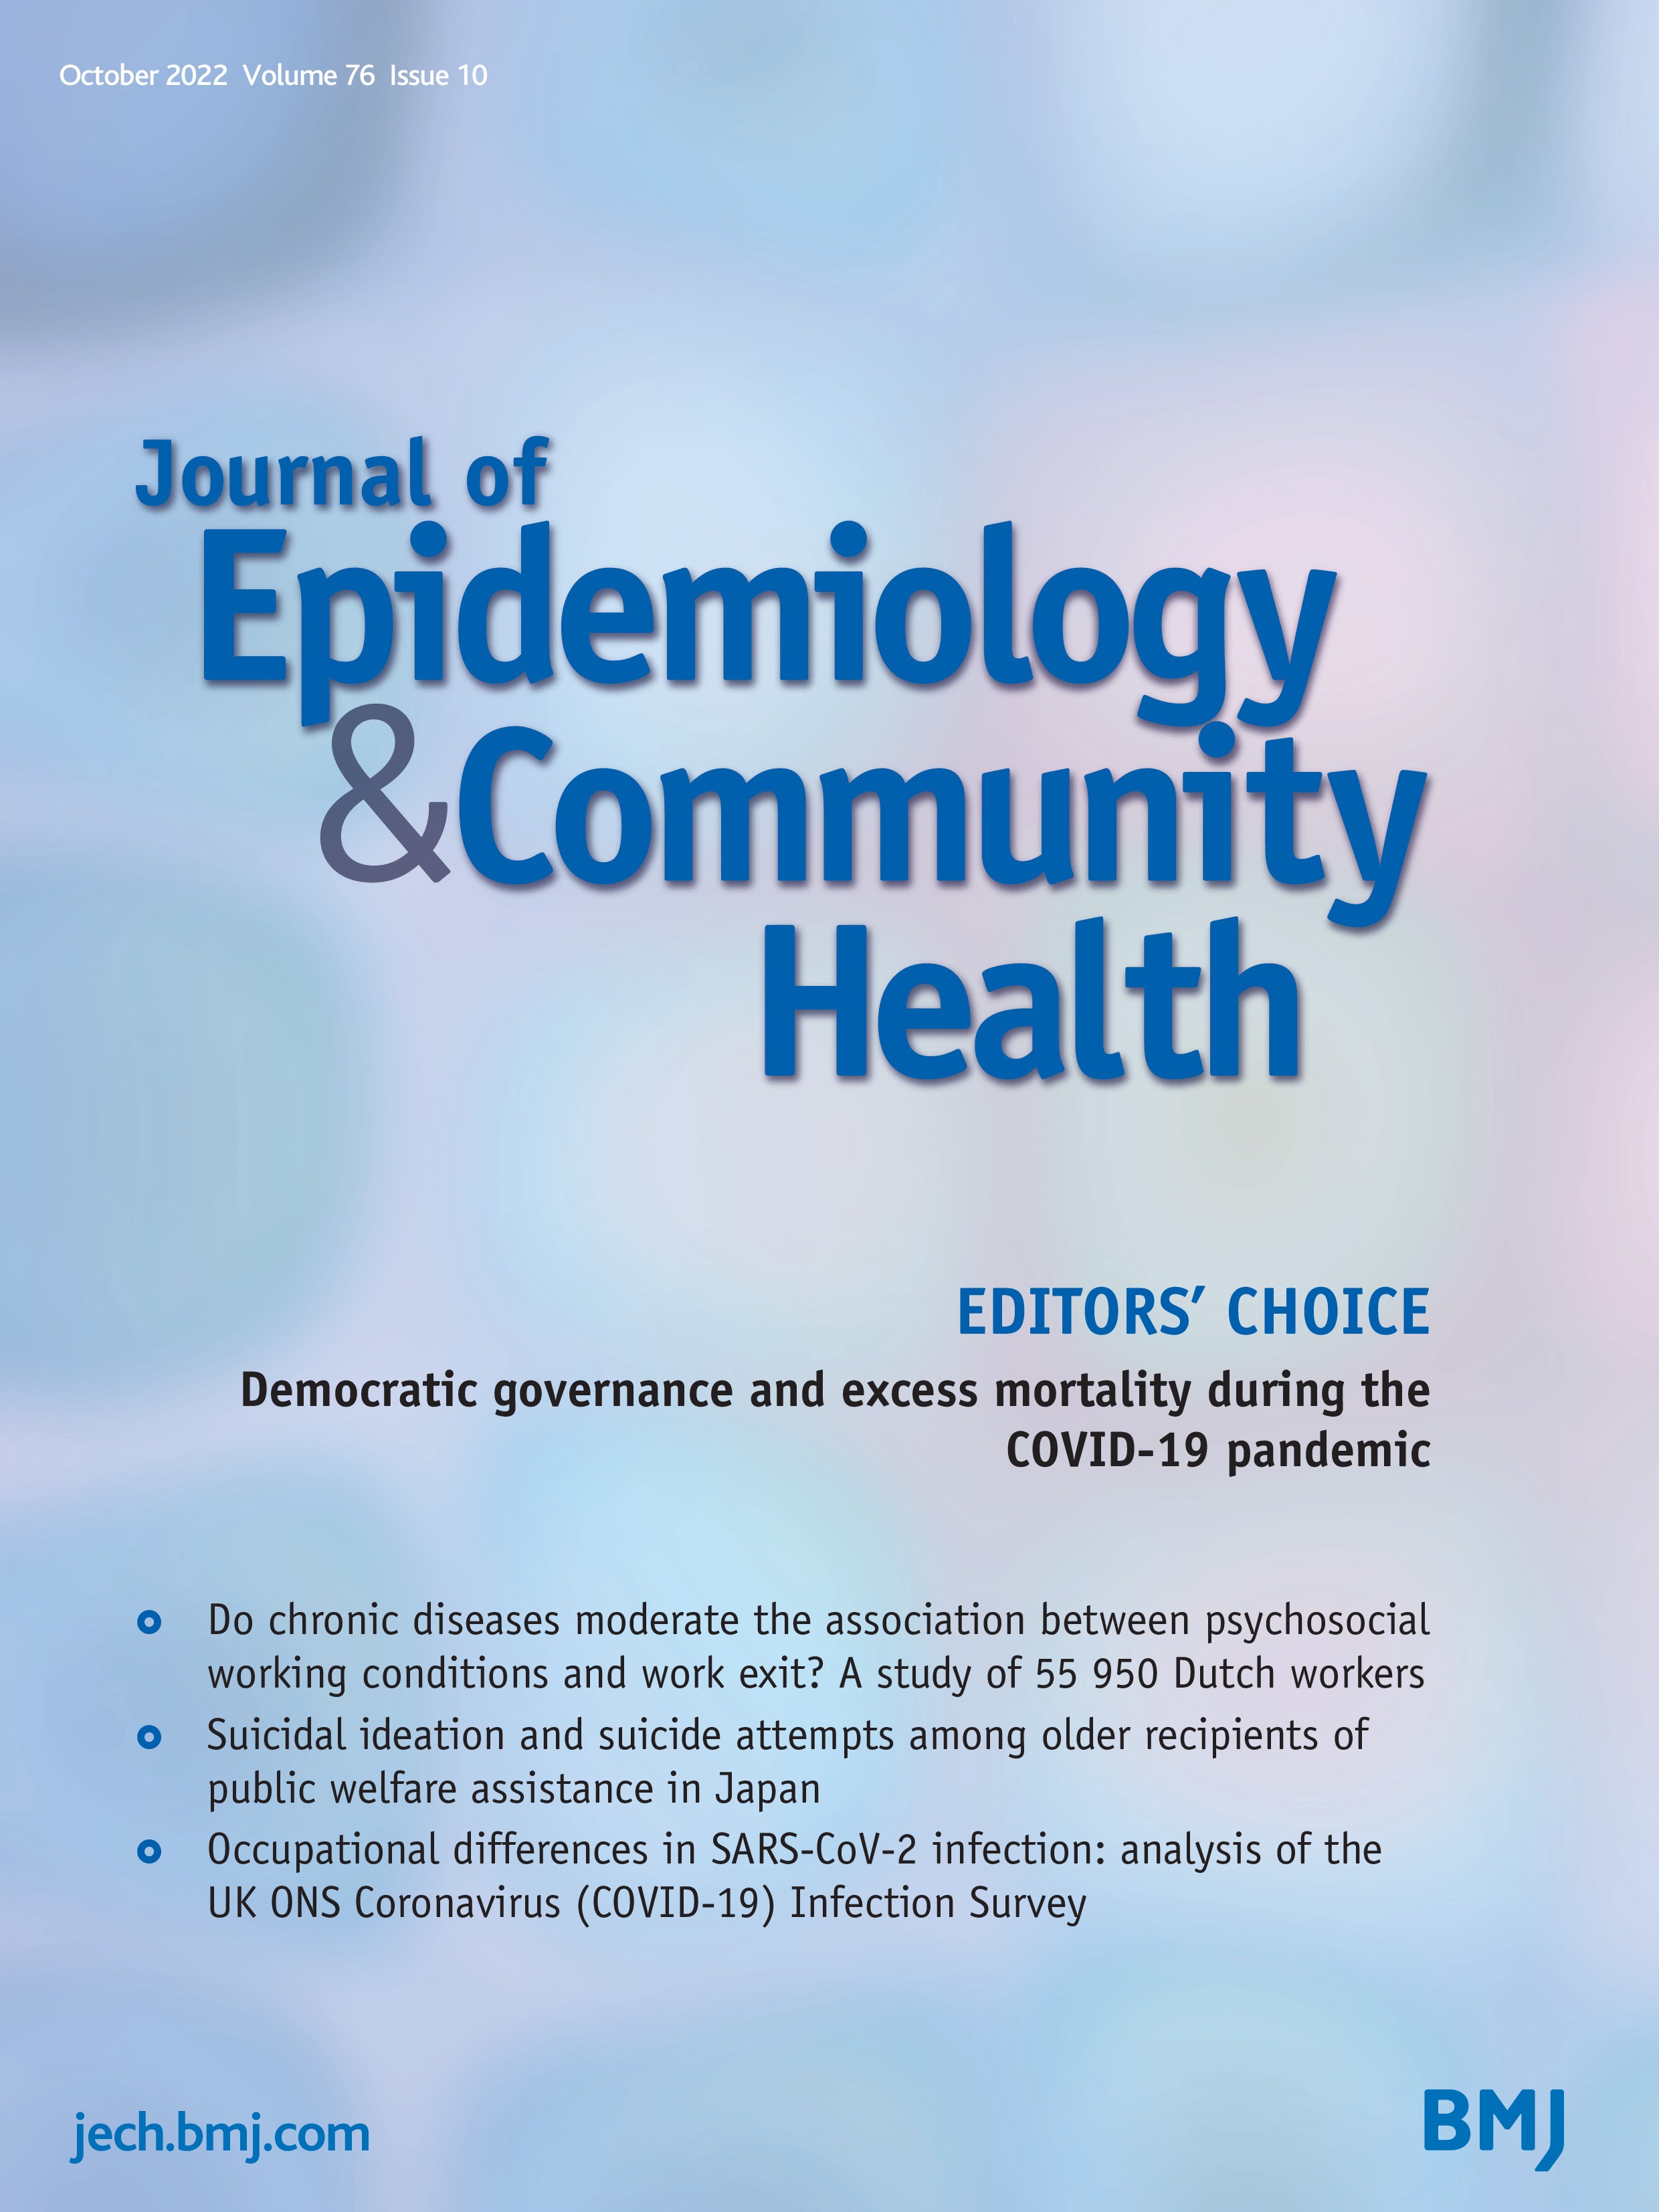 Peptic ulcer as mediator of the association between risk of gastric cancer and socioeconomic status, tobacco smoking, alcohol drinking and salt intake